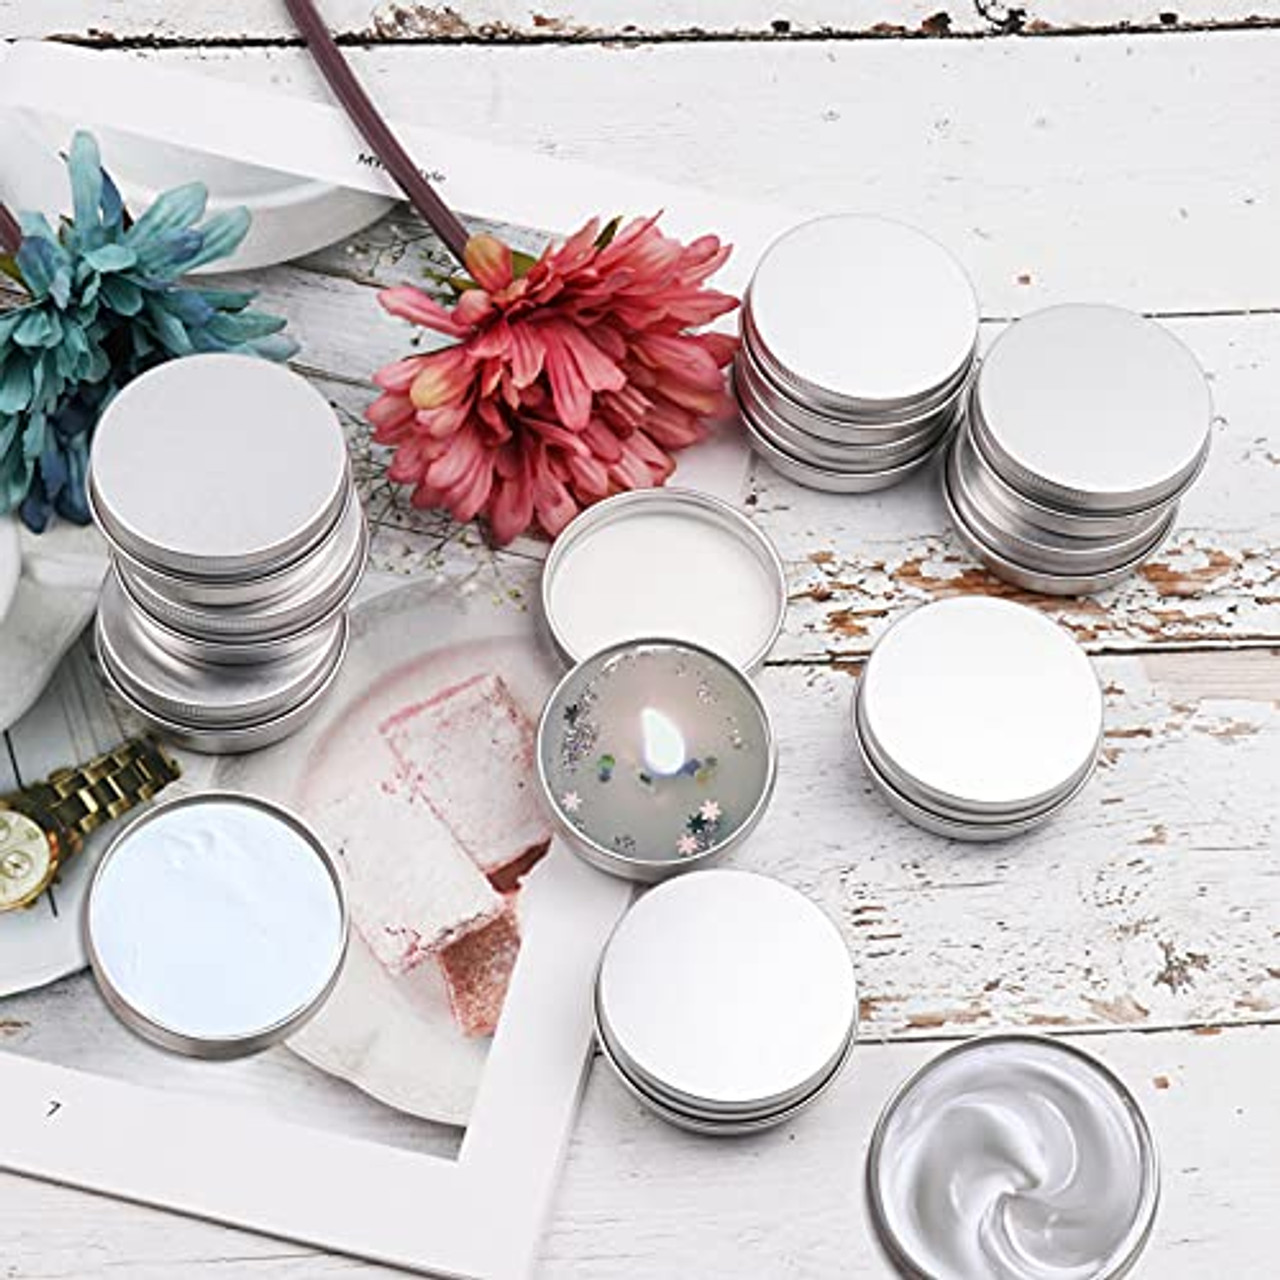 Tysun 60 Pack 2oz Metal Tins with Lids Aluminum Round Tin Candle Containers  Candle Tins with